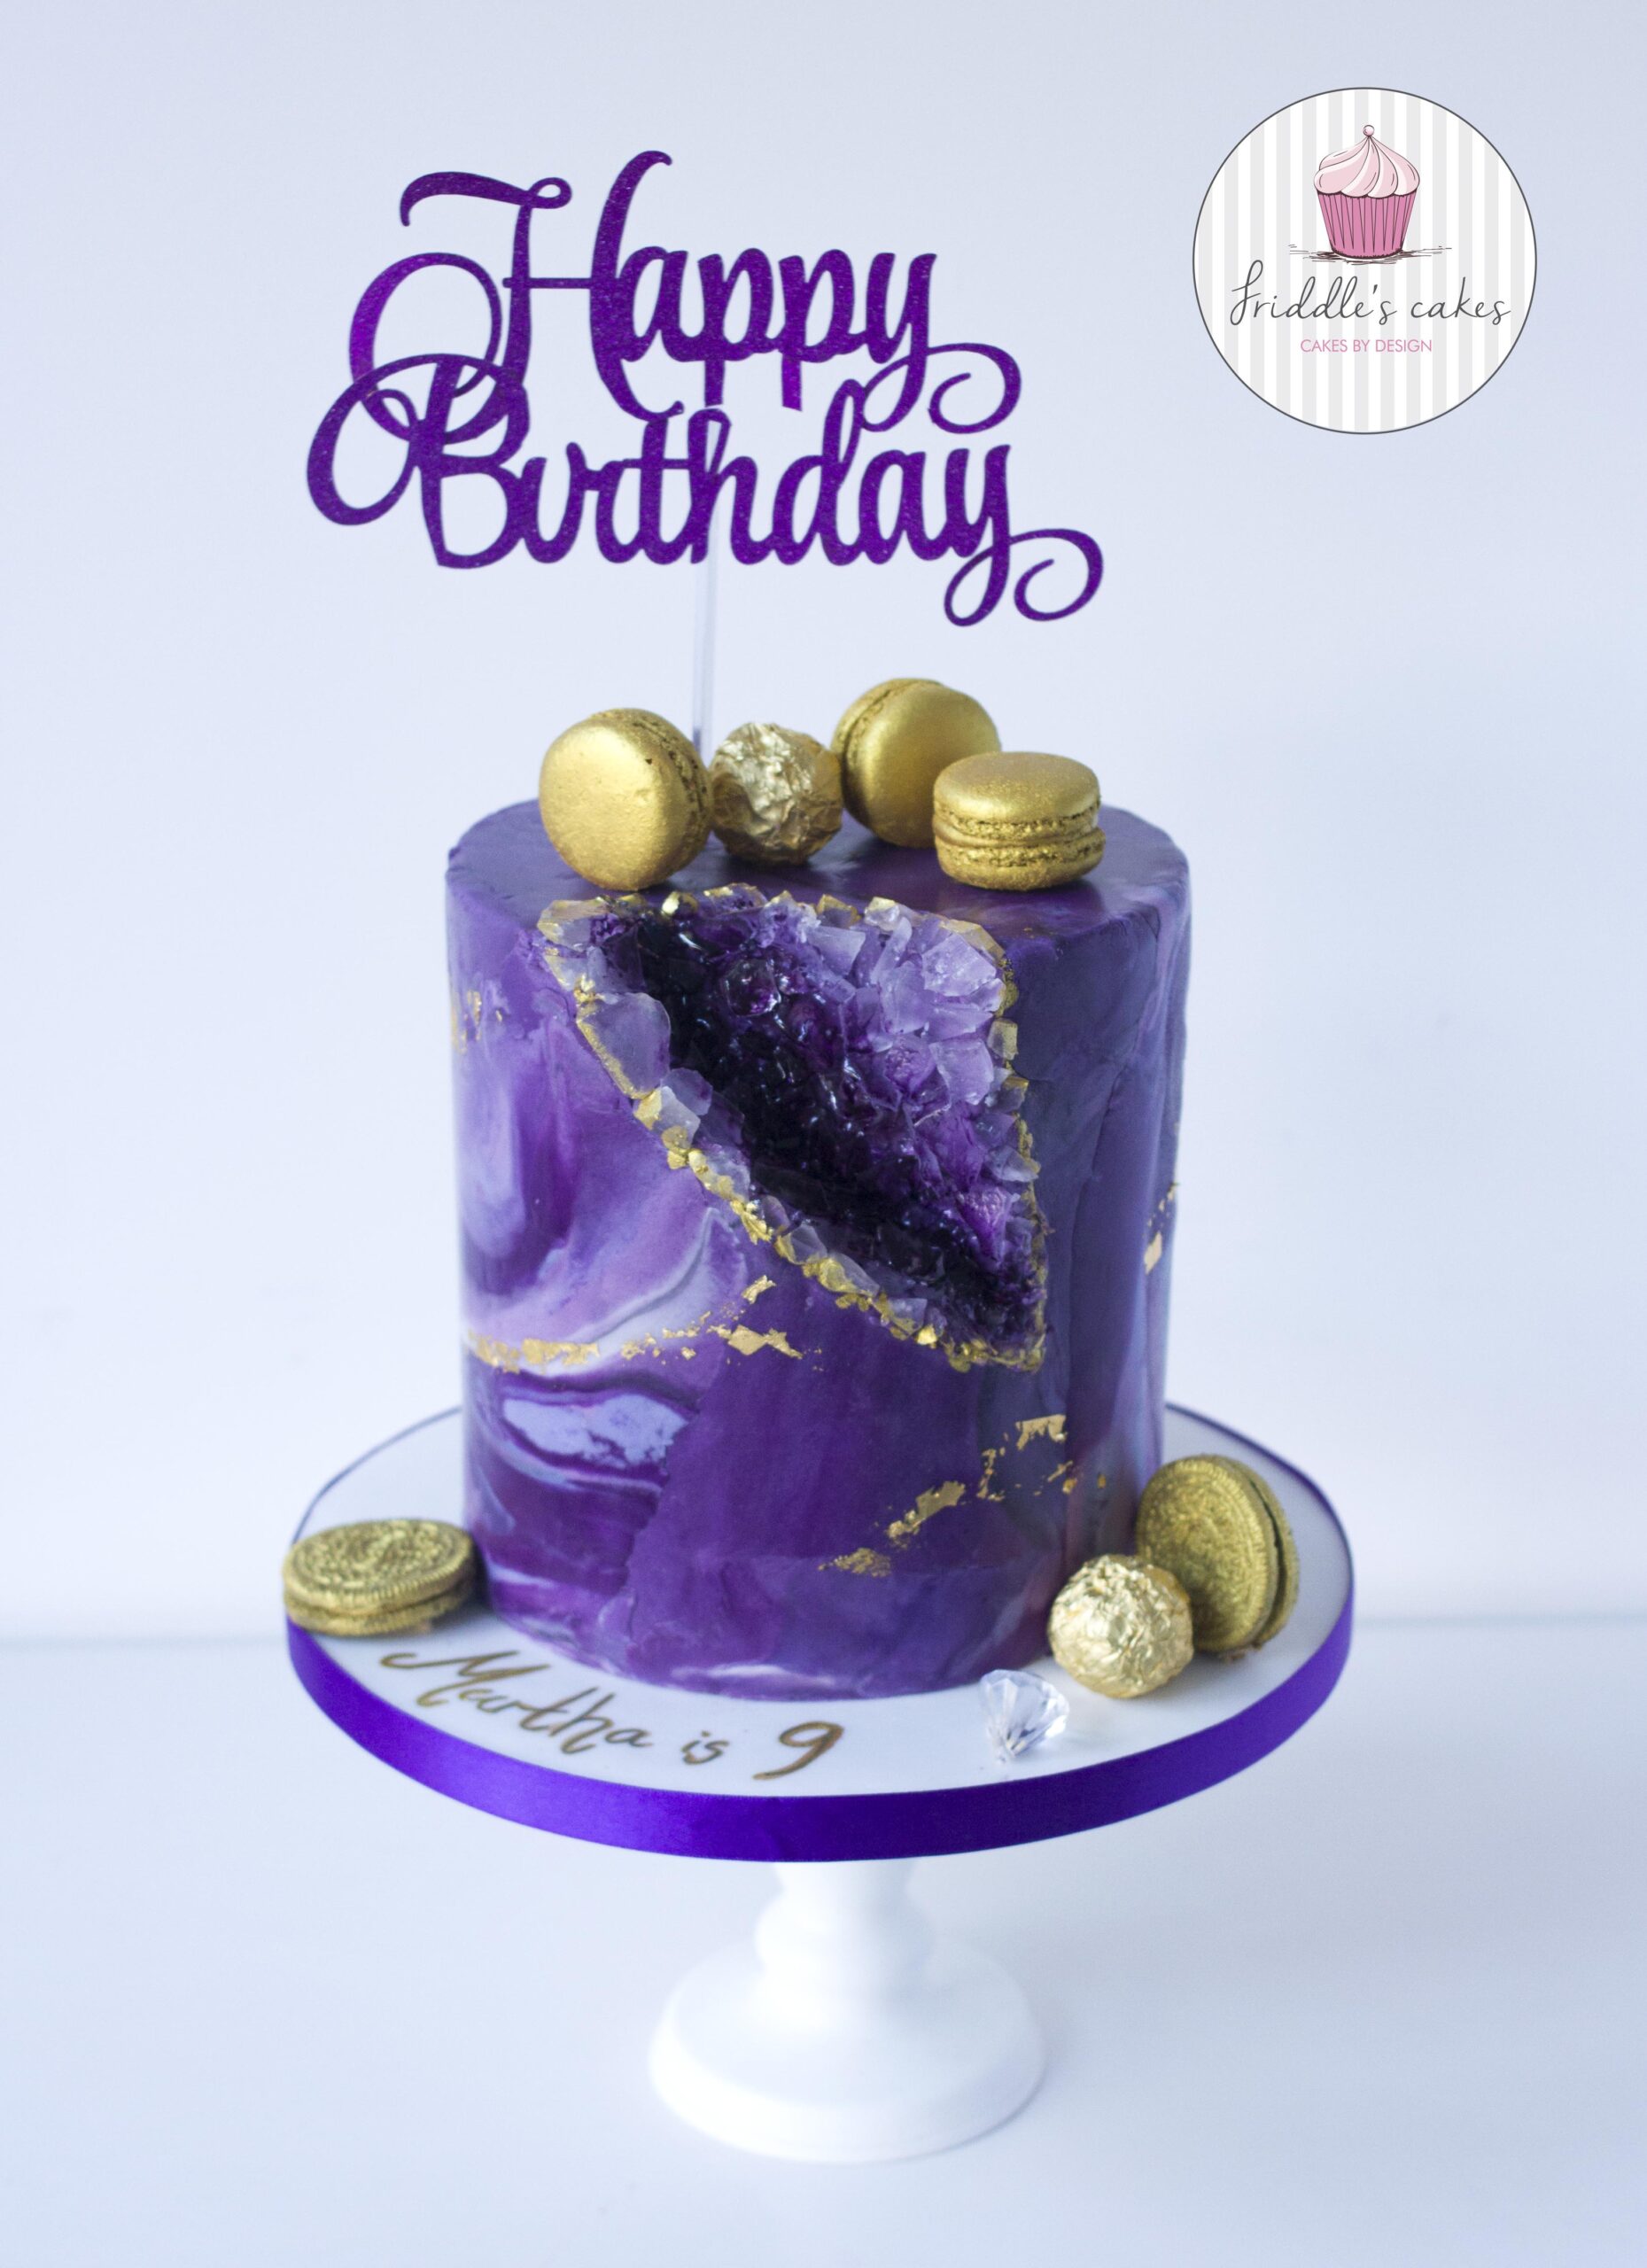 Cakes by Mandy - A gorgeous purple marble cake with isomalt diamonds and  lollipops with silver leaf and purple and silver macarons #cakesofinsta # cakes #cakesofinstagram #cakeart #cakeartist #isomalt #acdnmember  #isomaltlollipops #macarons | Facebook